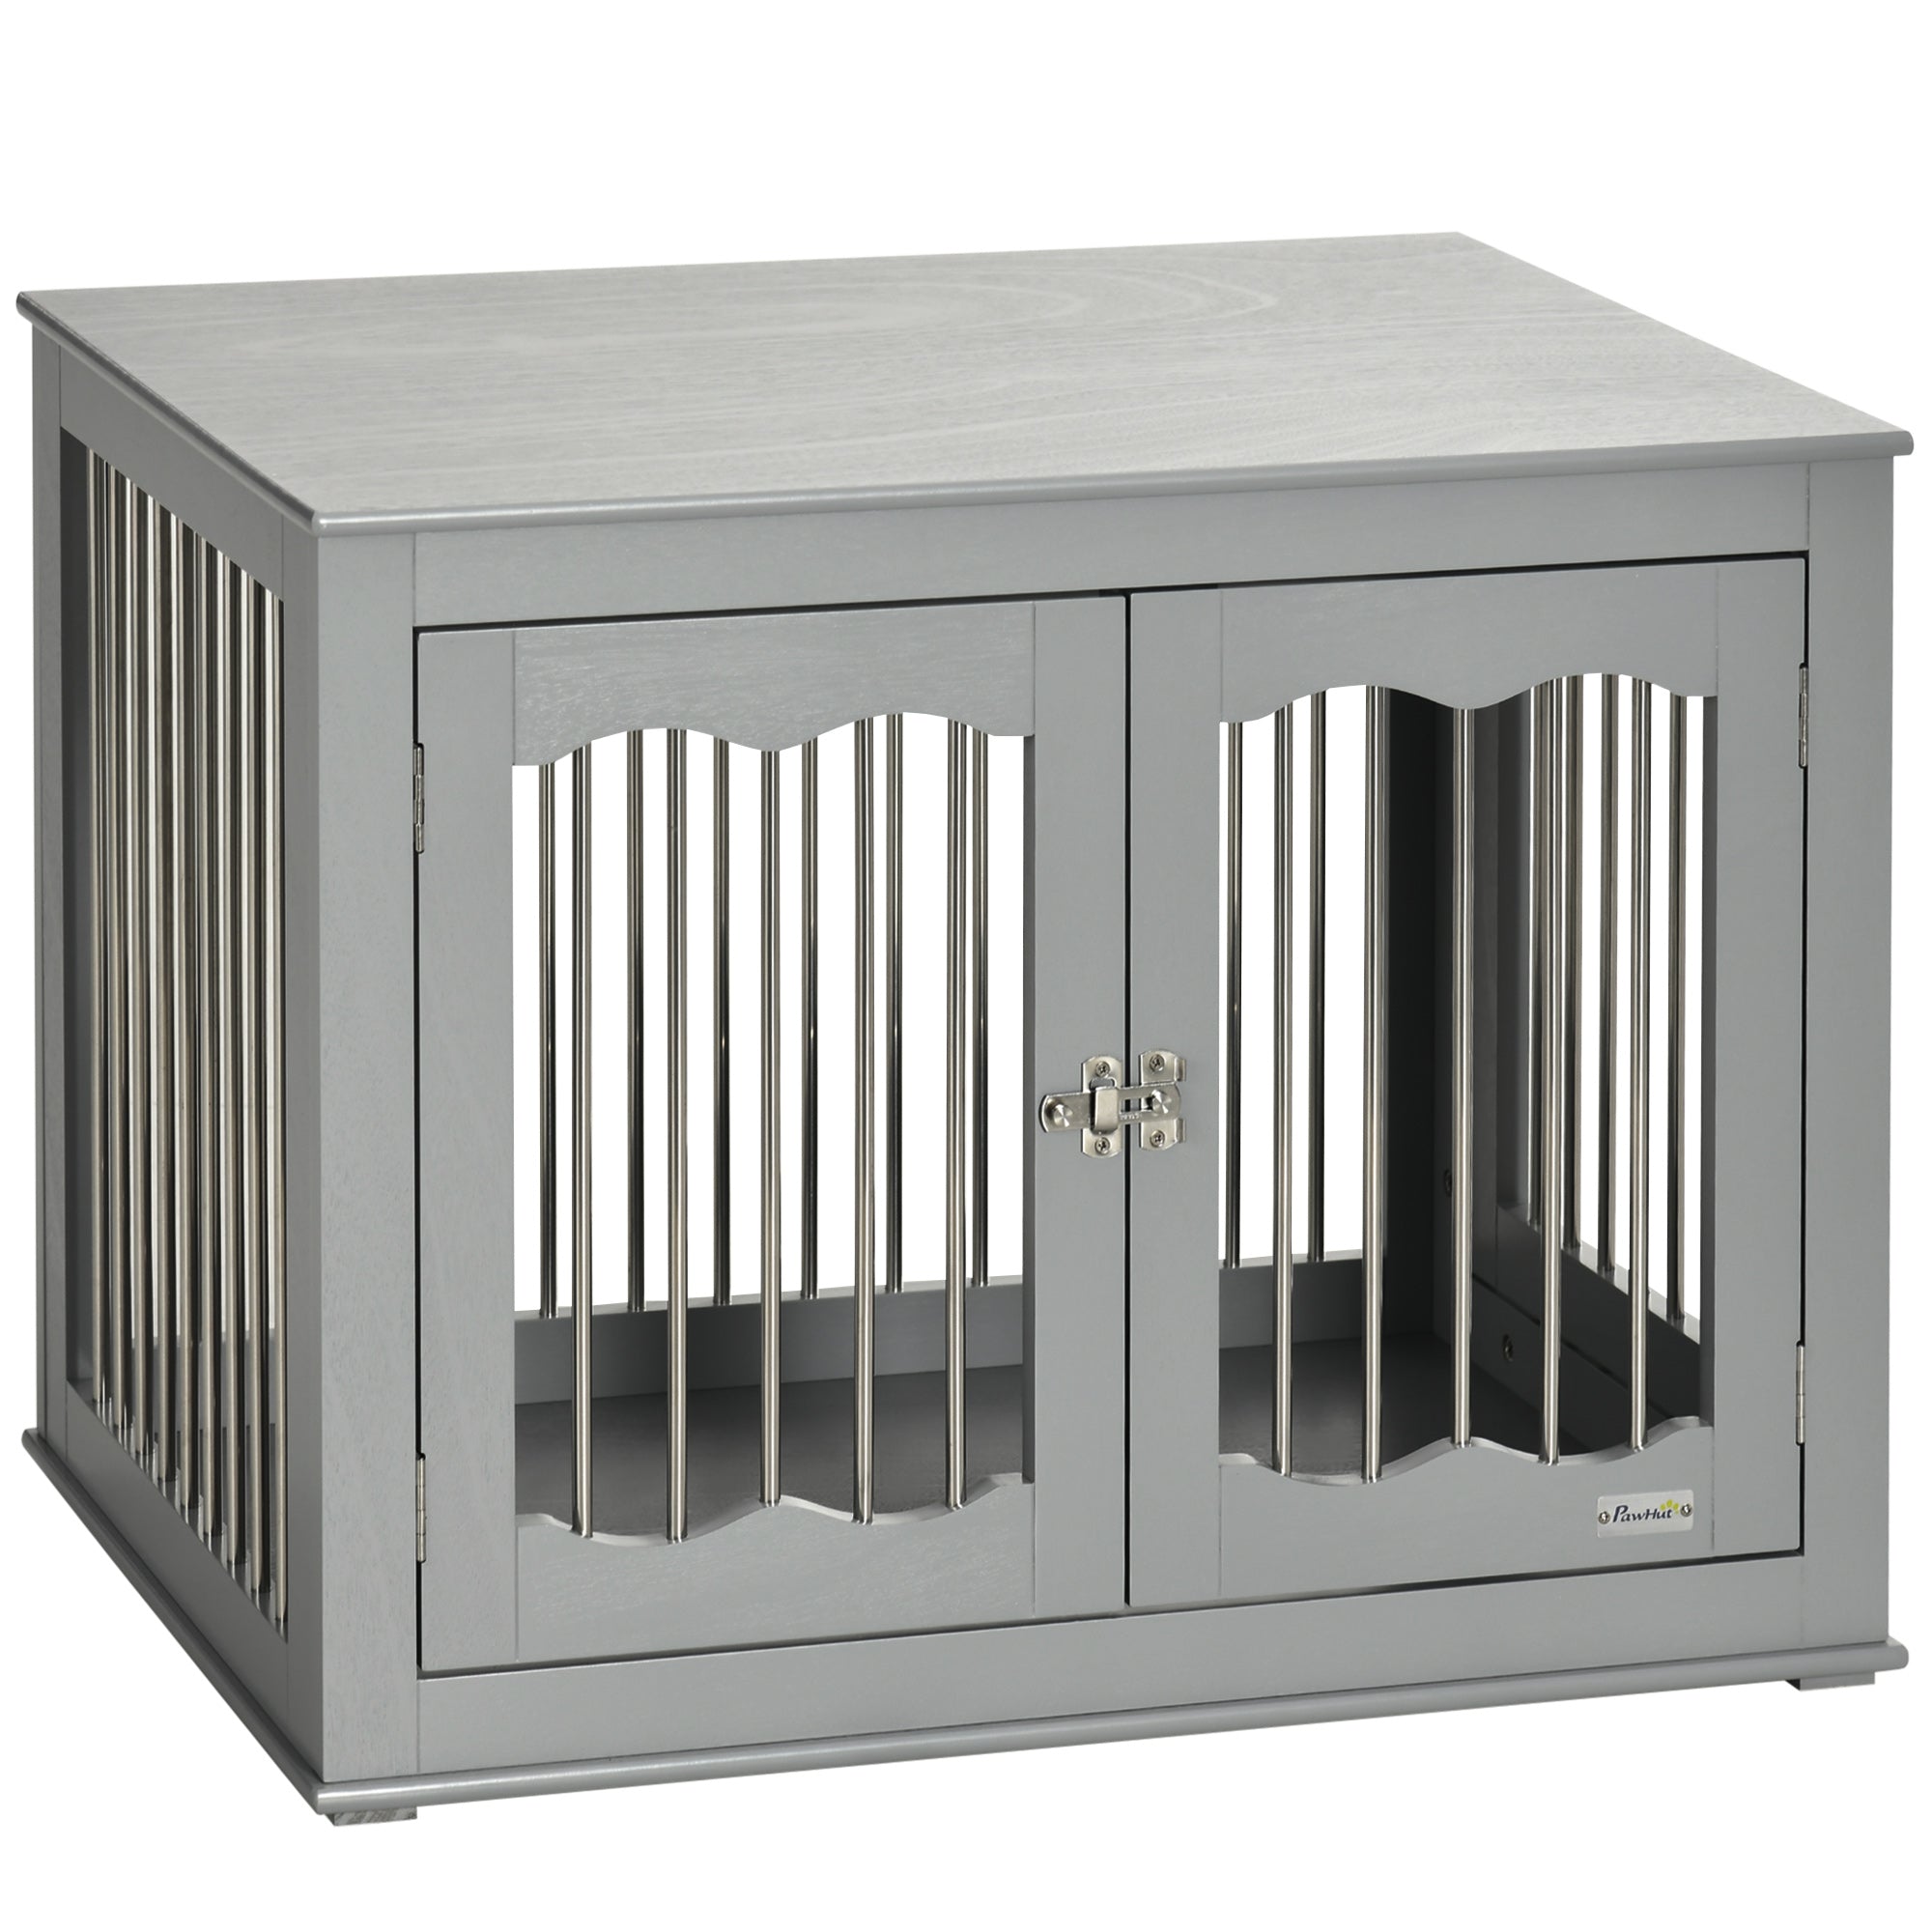 PawHut Dog Crate End Table w/ Locks and Latches - for Medium Dogs  | TJ Hughes